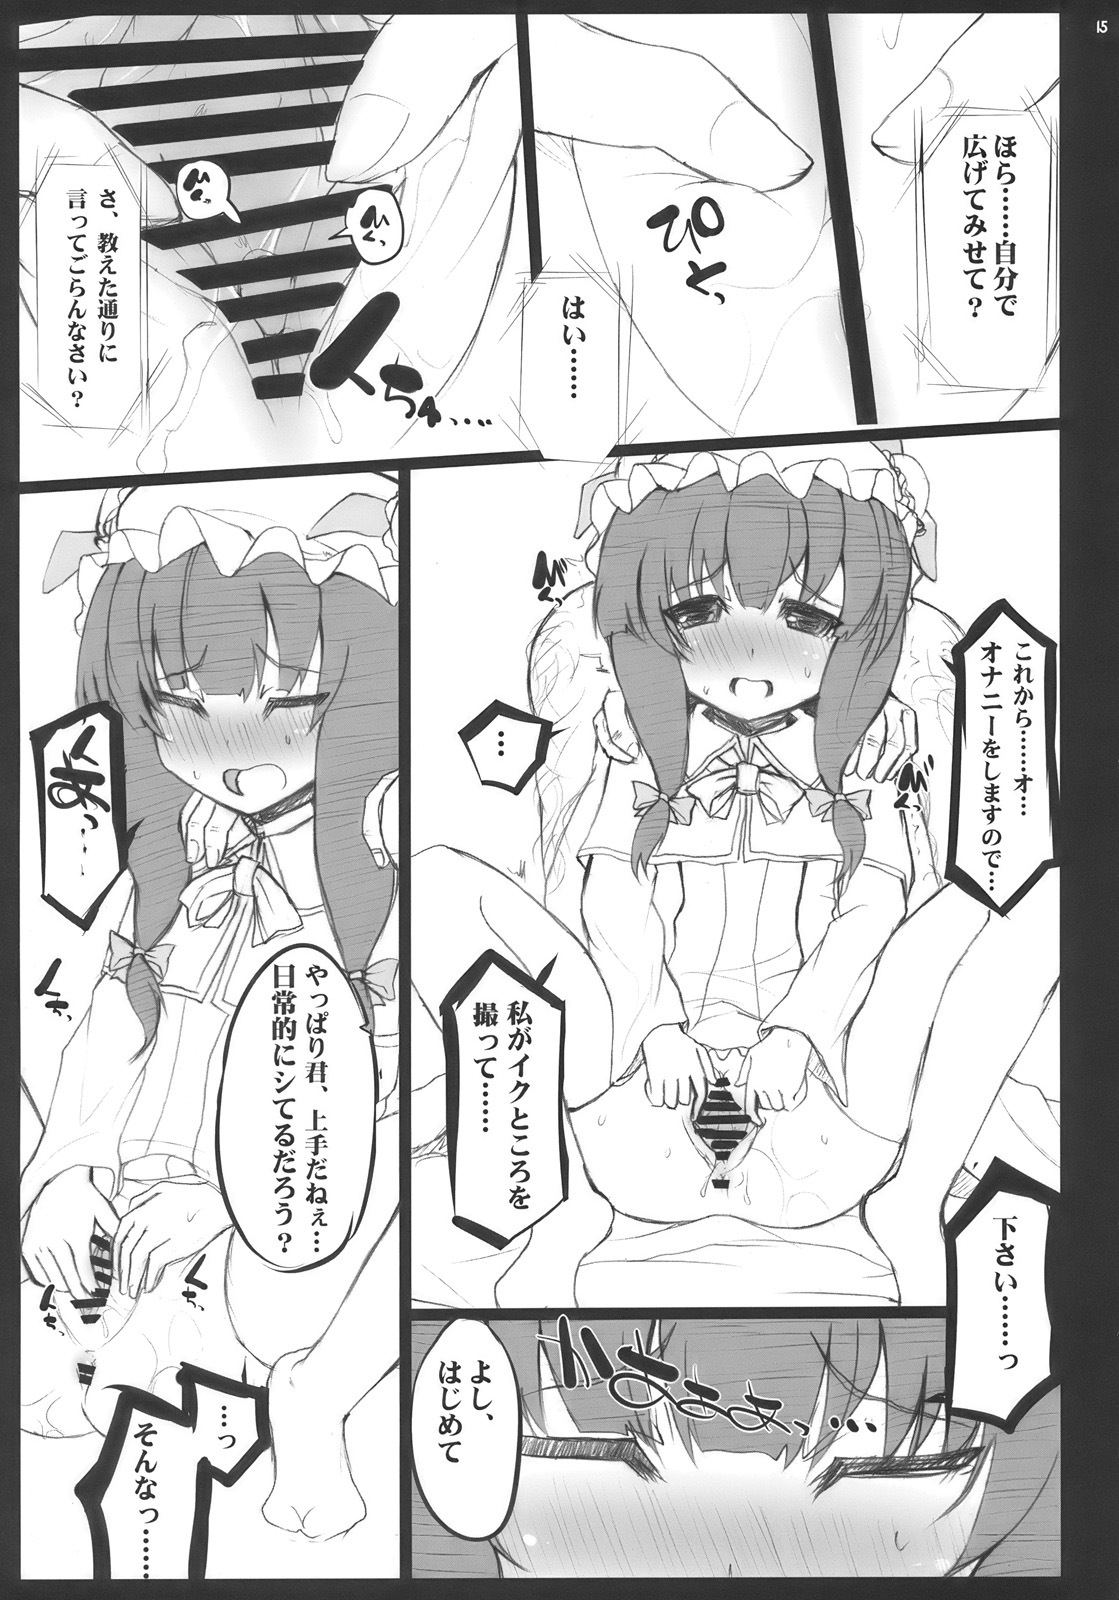 (Reitaisai 7) [INST (interstellar)] ONE CUT EXTINGUISHER (Touhou Project) page 15 full